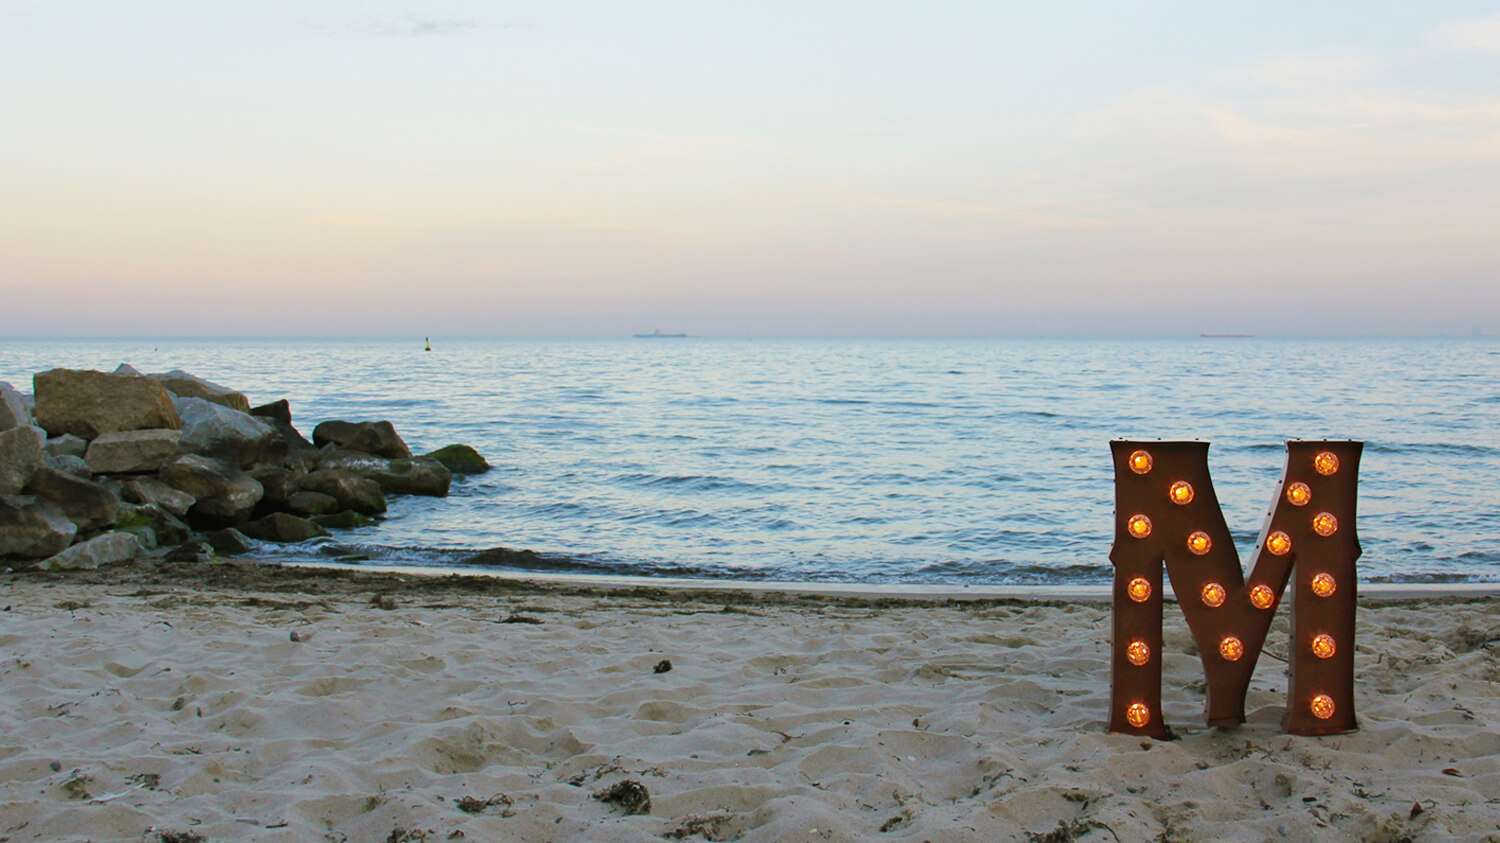 letters bulbs - Spatial standing lettering with light bulbs on a beach